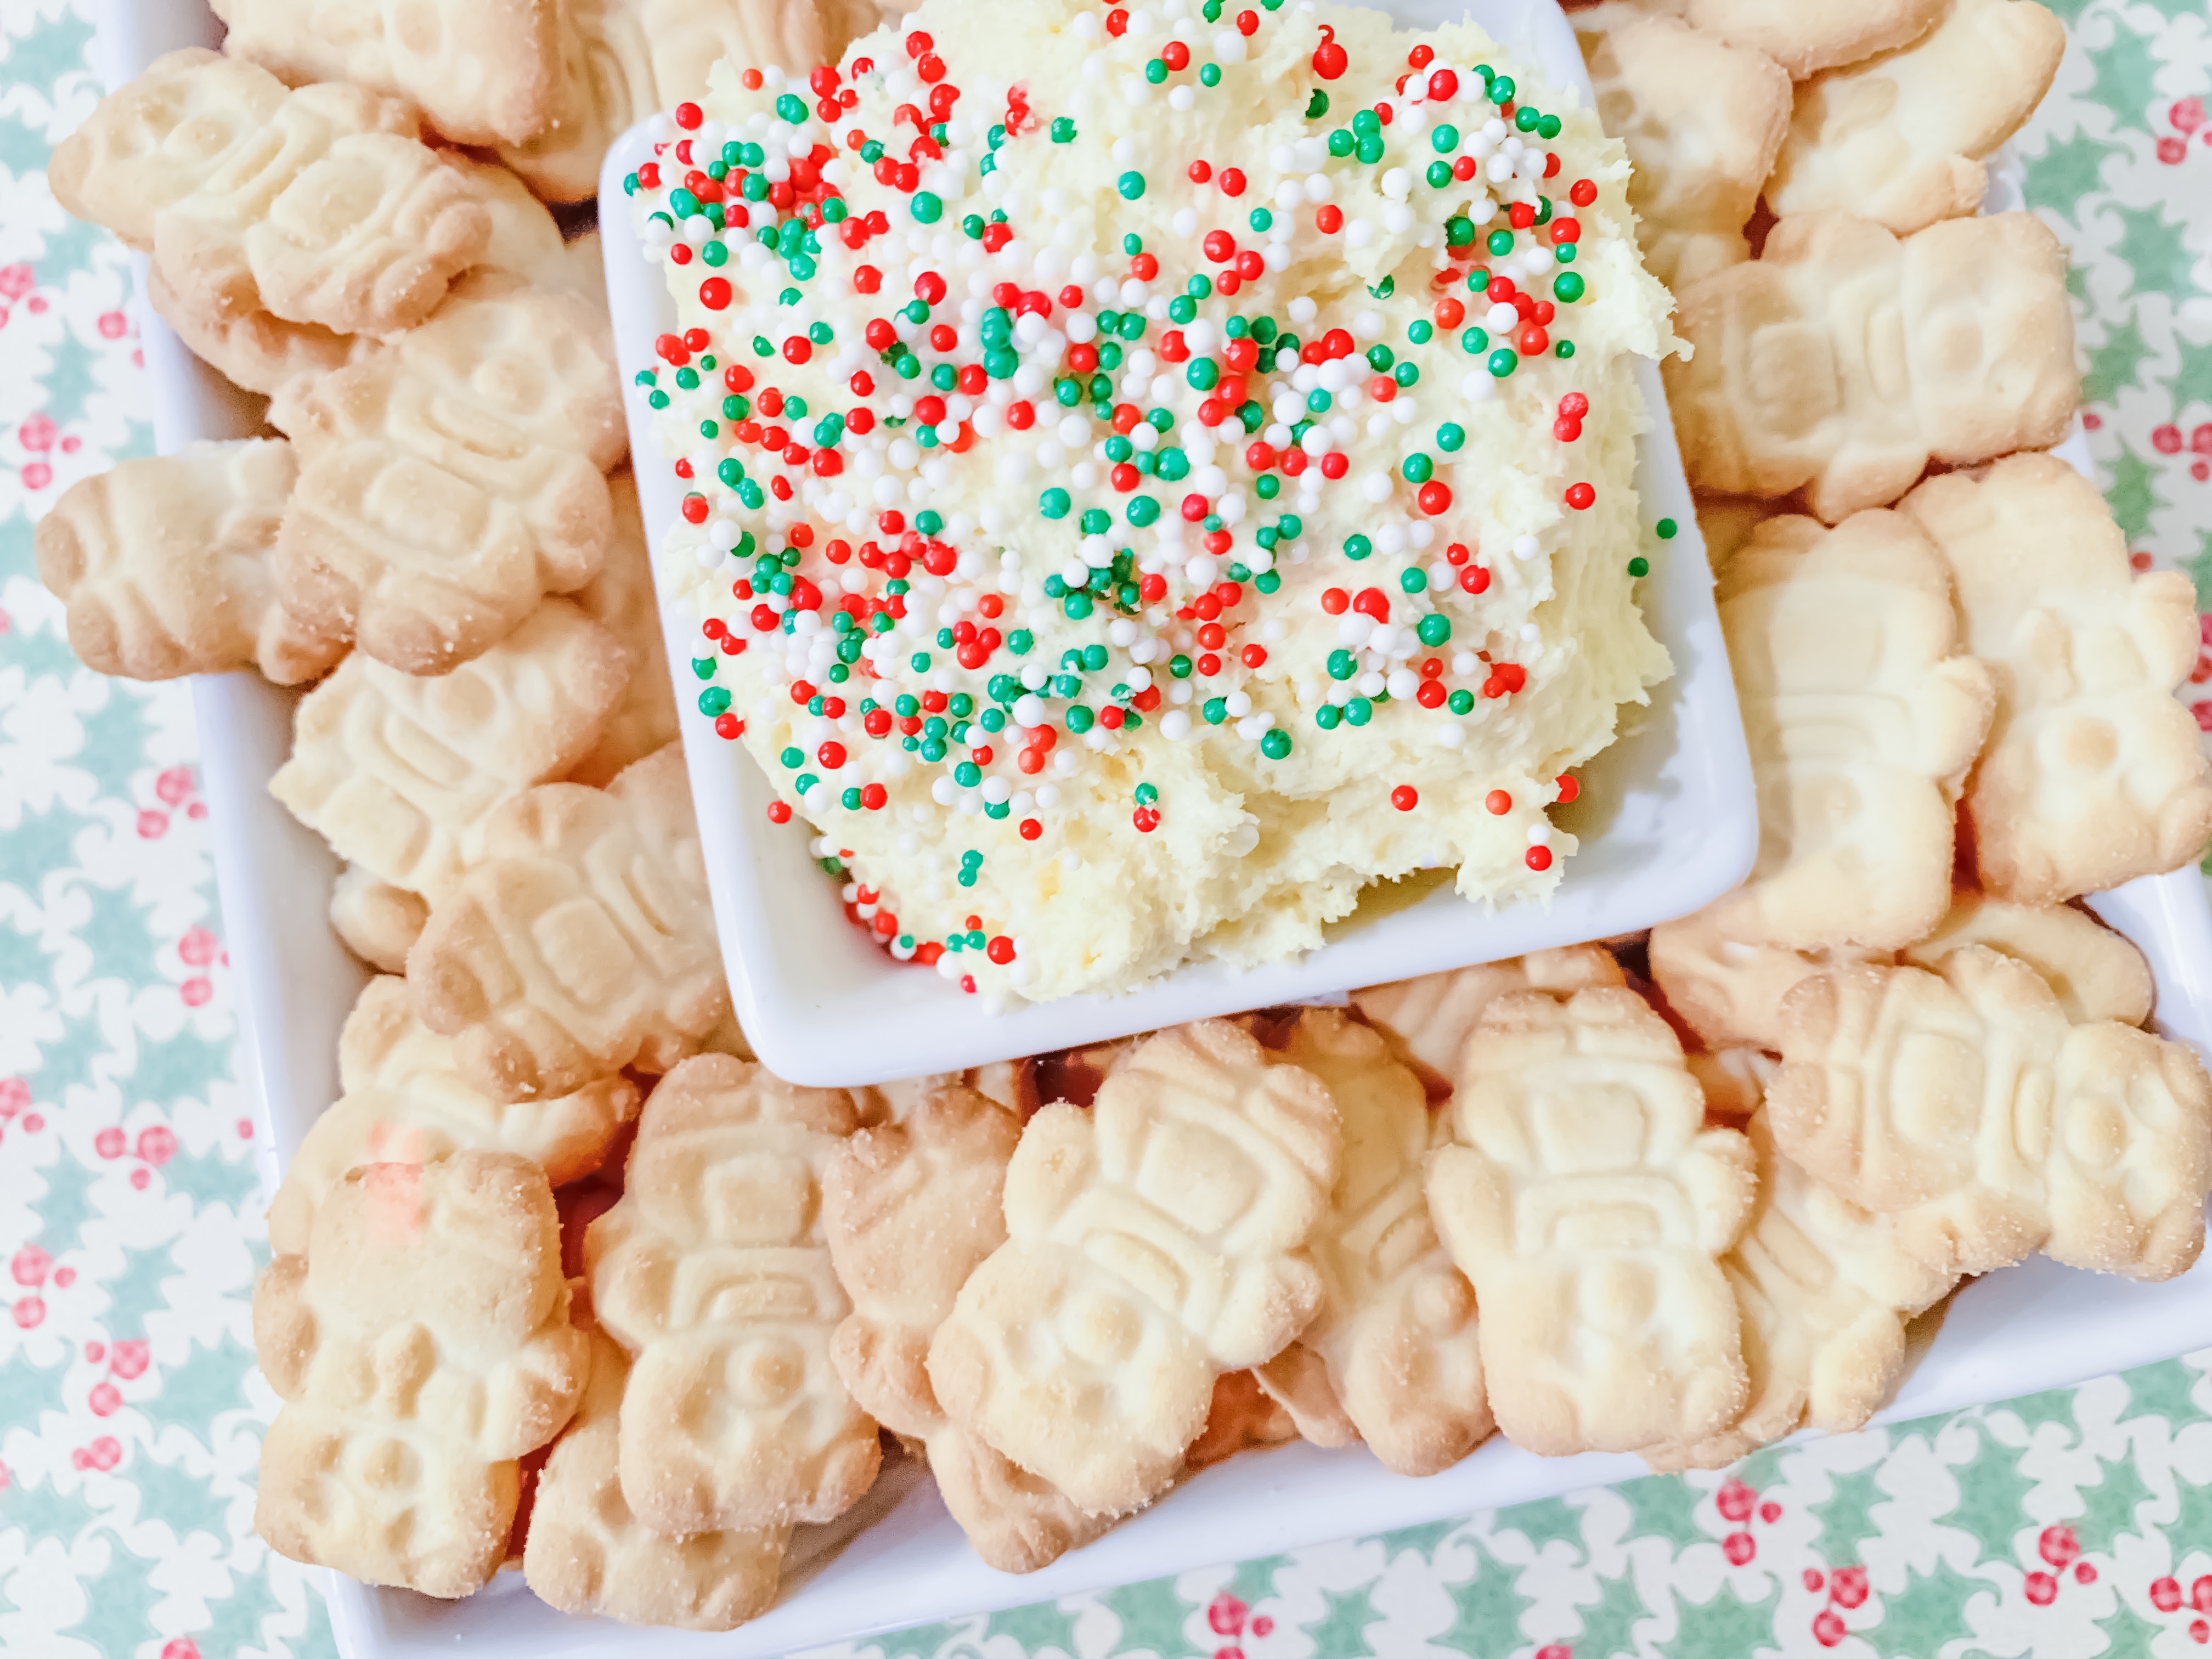 Looking for a delicious Dunkaroo Dip recipe? Dunkaroo Dip is a great sweet dip for parties and get togethers. This version is made as a Christmas treat but it is easily changed to a fun anytime dip by changing the sprinkles.